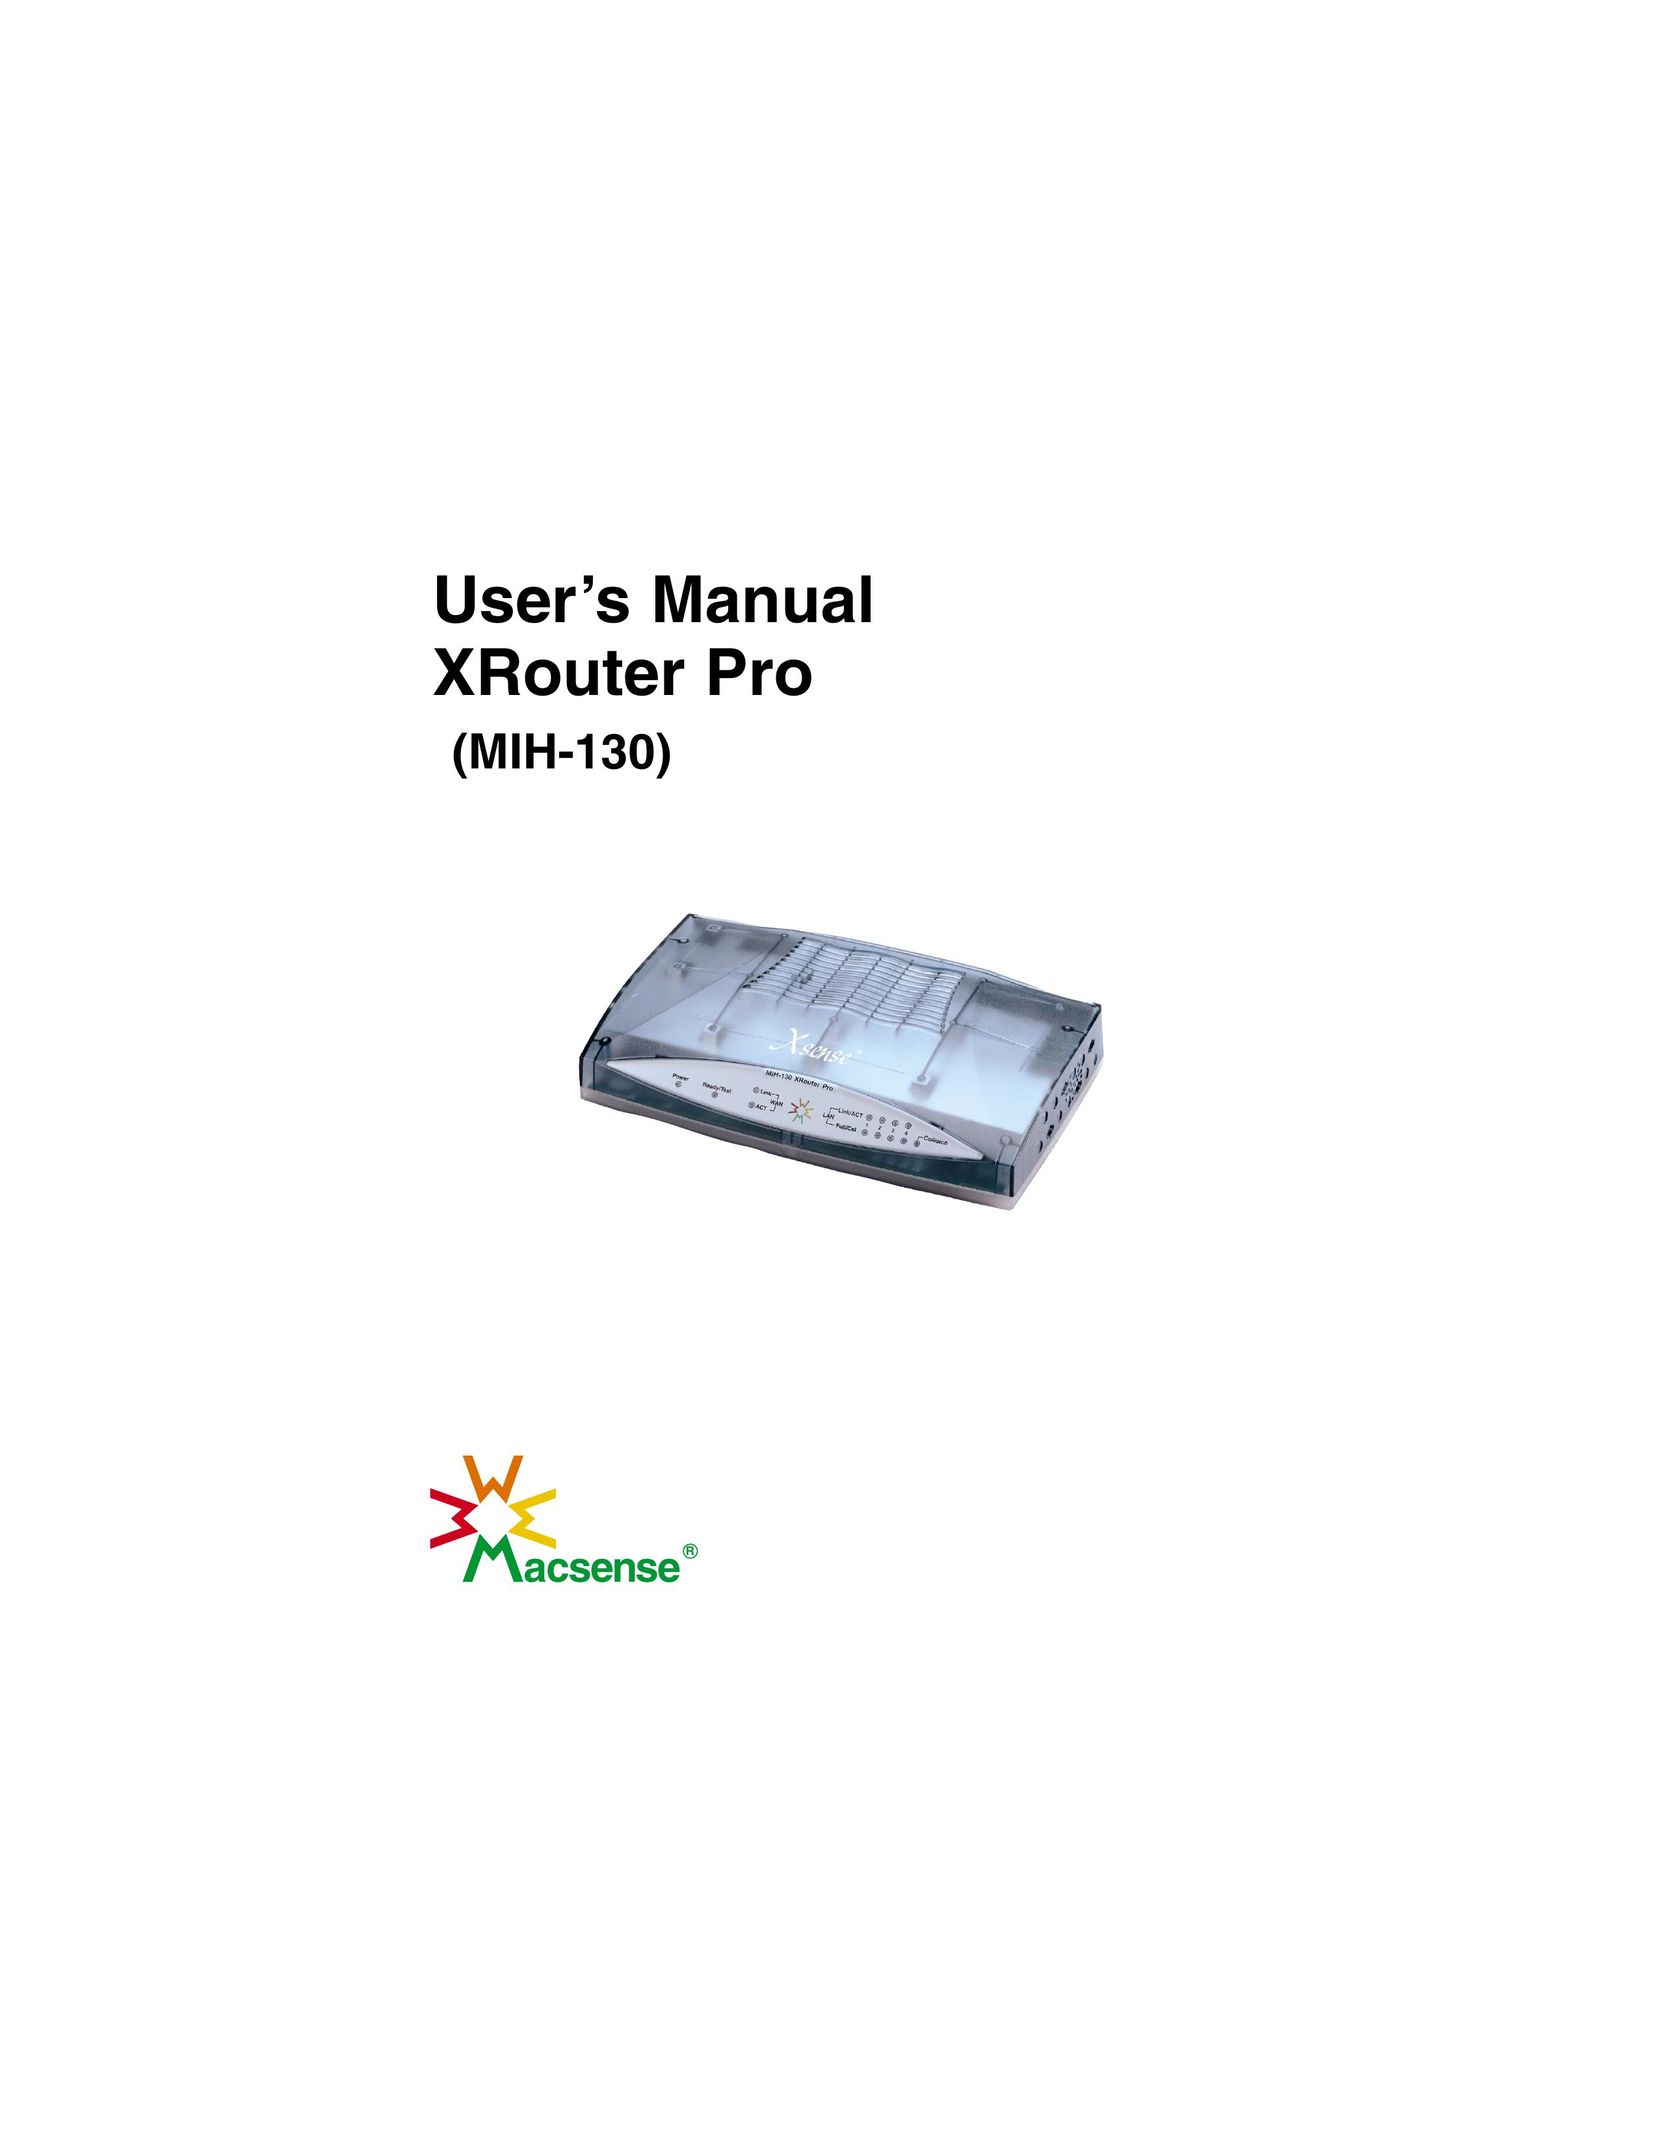 Macsense Connectivity MIH-130 Network Router User Manual